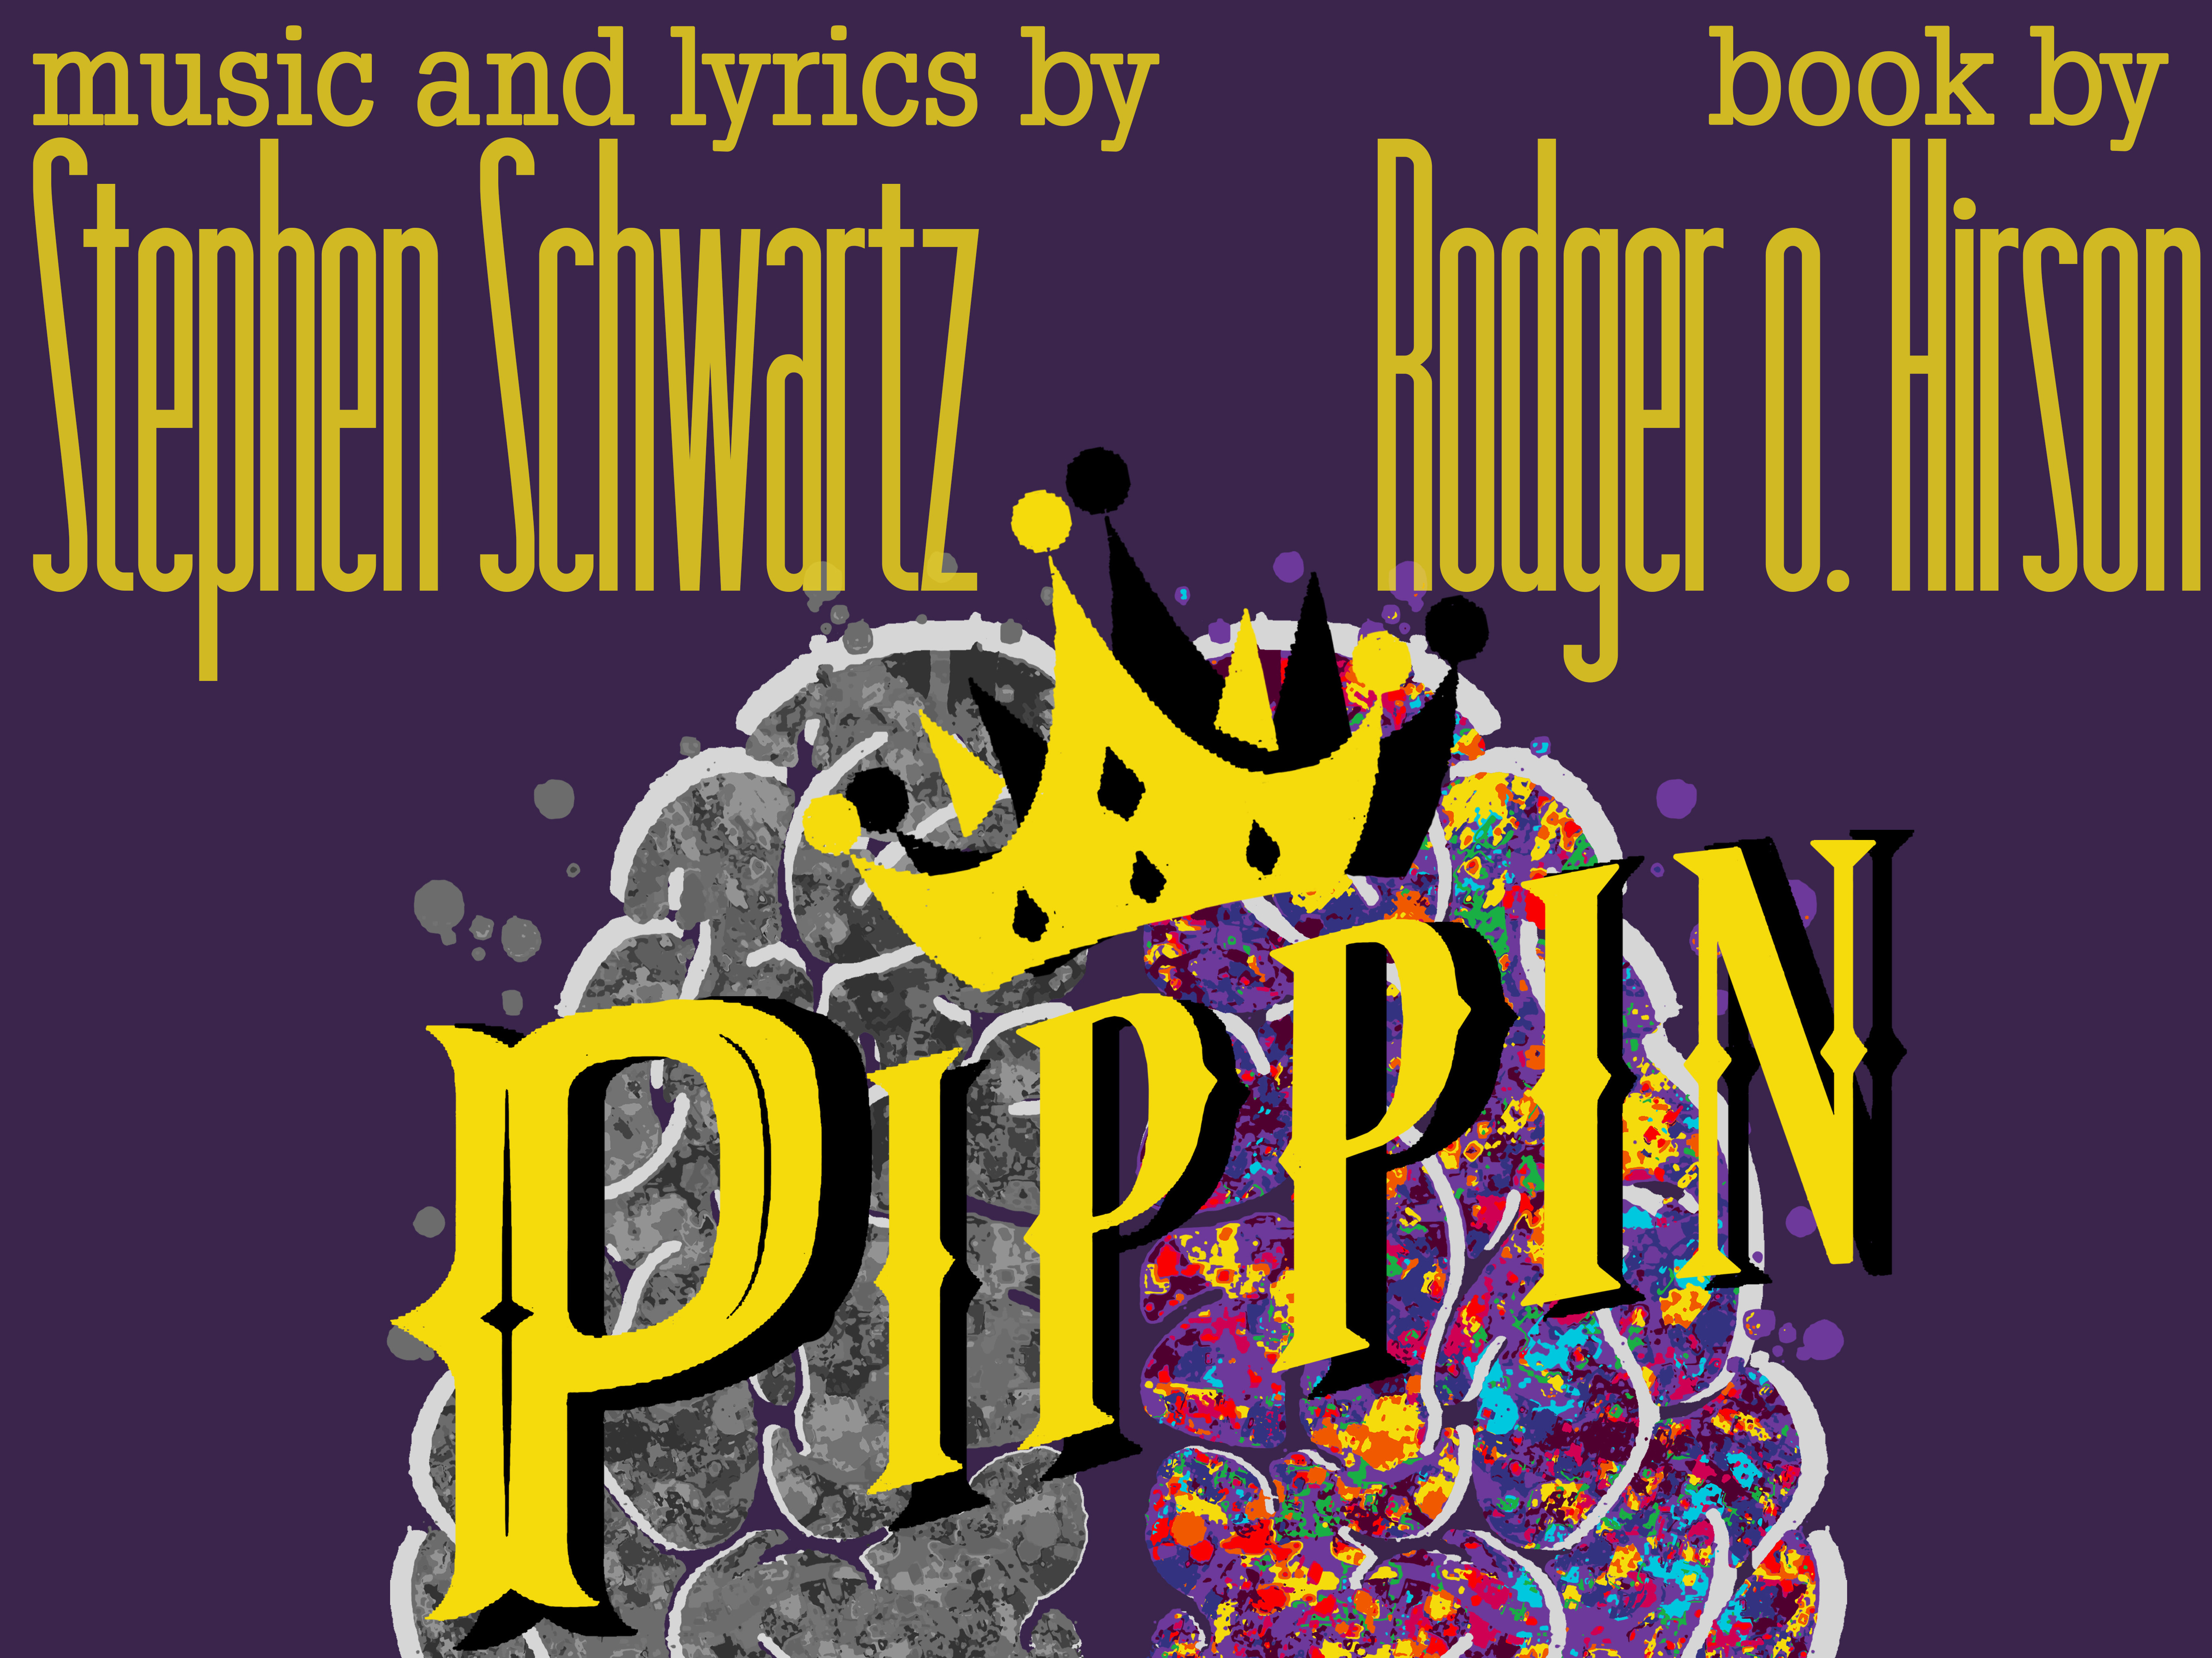 A snippit of a poster about the play Pippin. It shows an image of a brain, with the left side monochromatic and the right side colorful and lively. Credits: music and lyrics by Stephen Schwartz, book by Rodger o. Hirson.